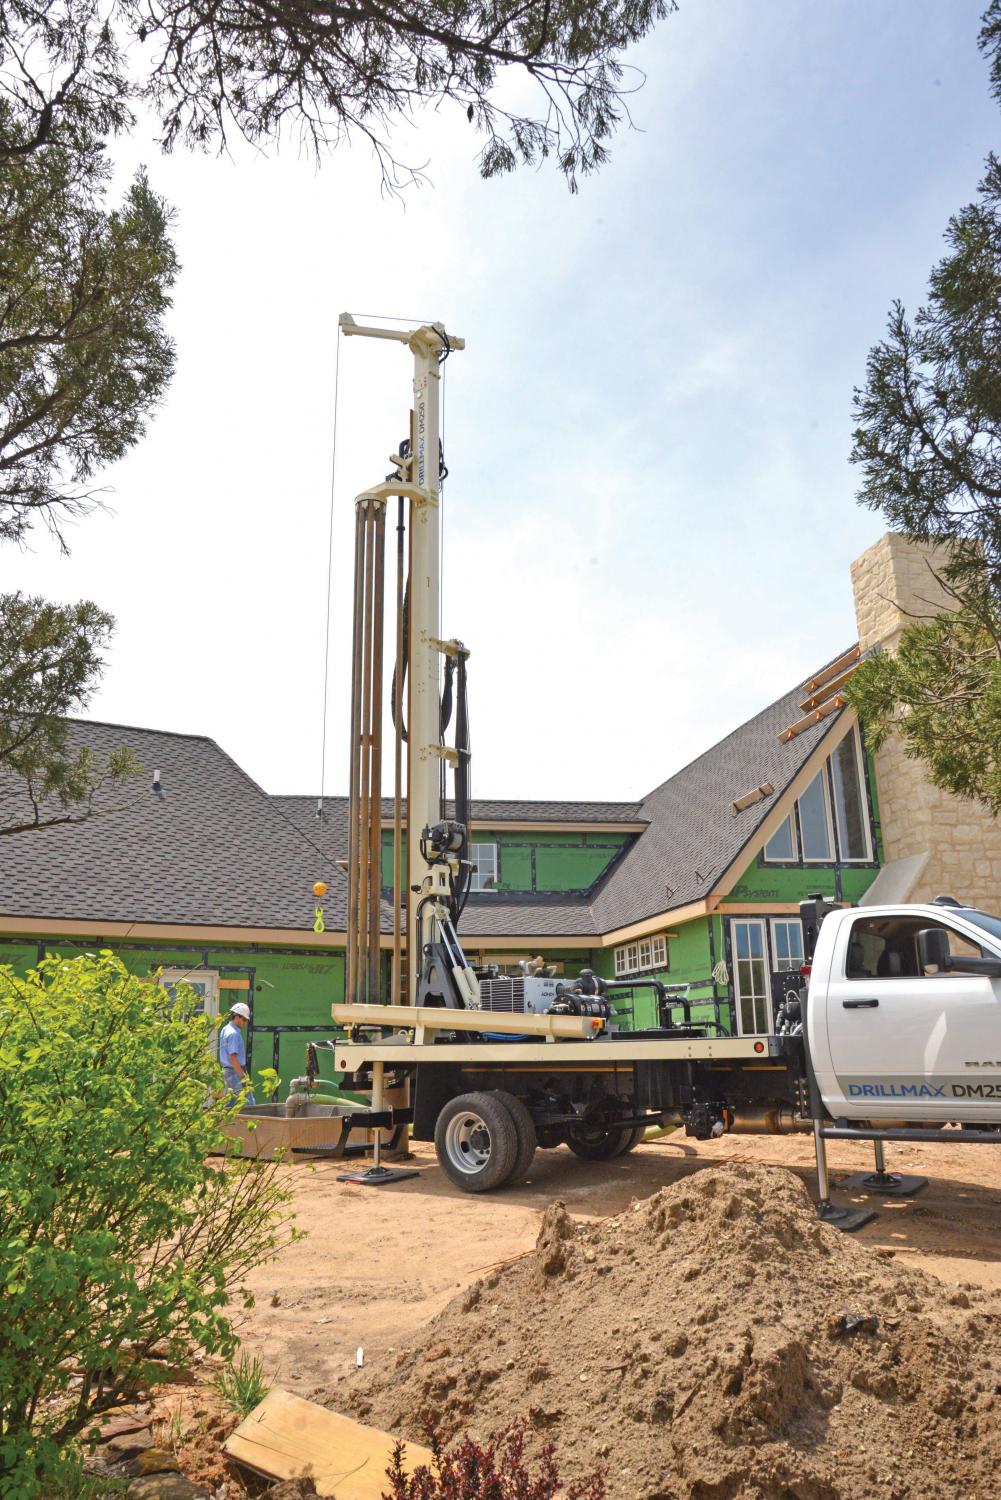 Simple operation and surprising power of DRILLMAX® DM250 water well drilling rigs make for fast production in tight spaces using 20-foot pipe for residential well installation.